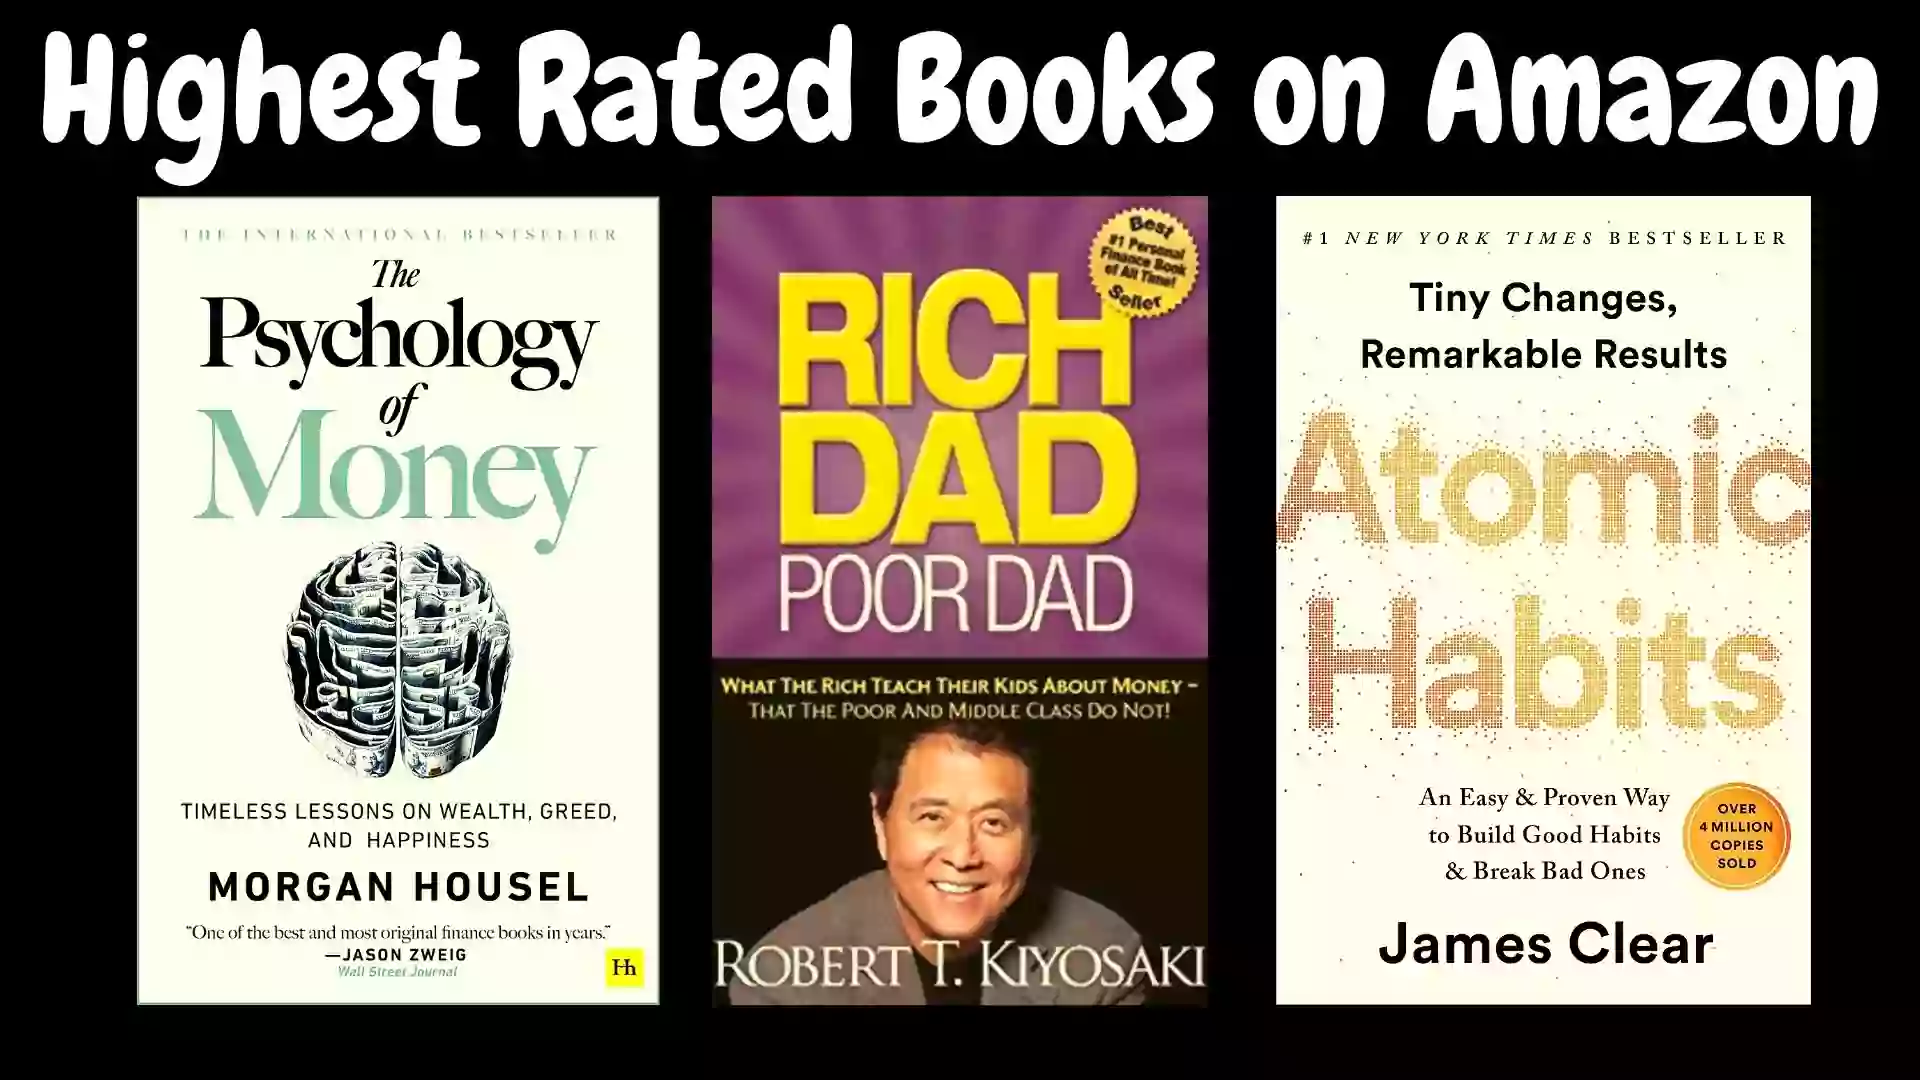 Highest Rated Books on Amazon